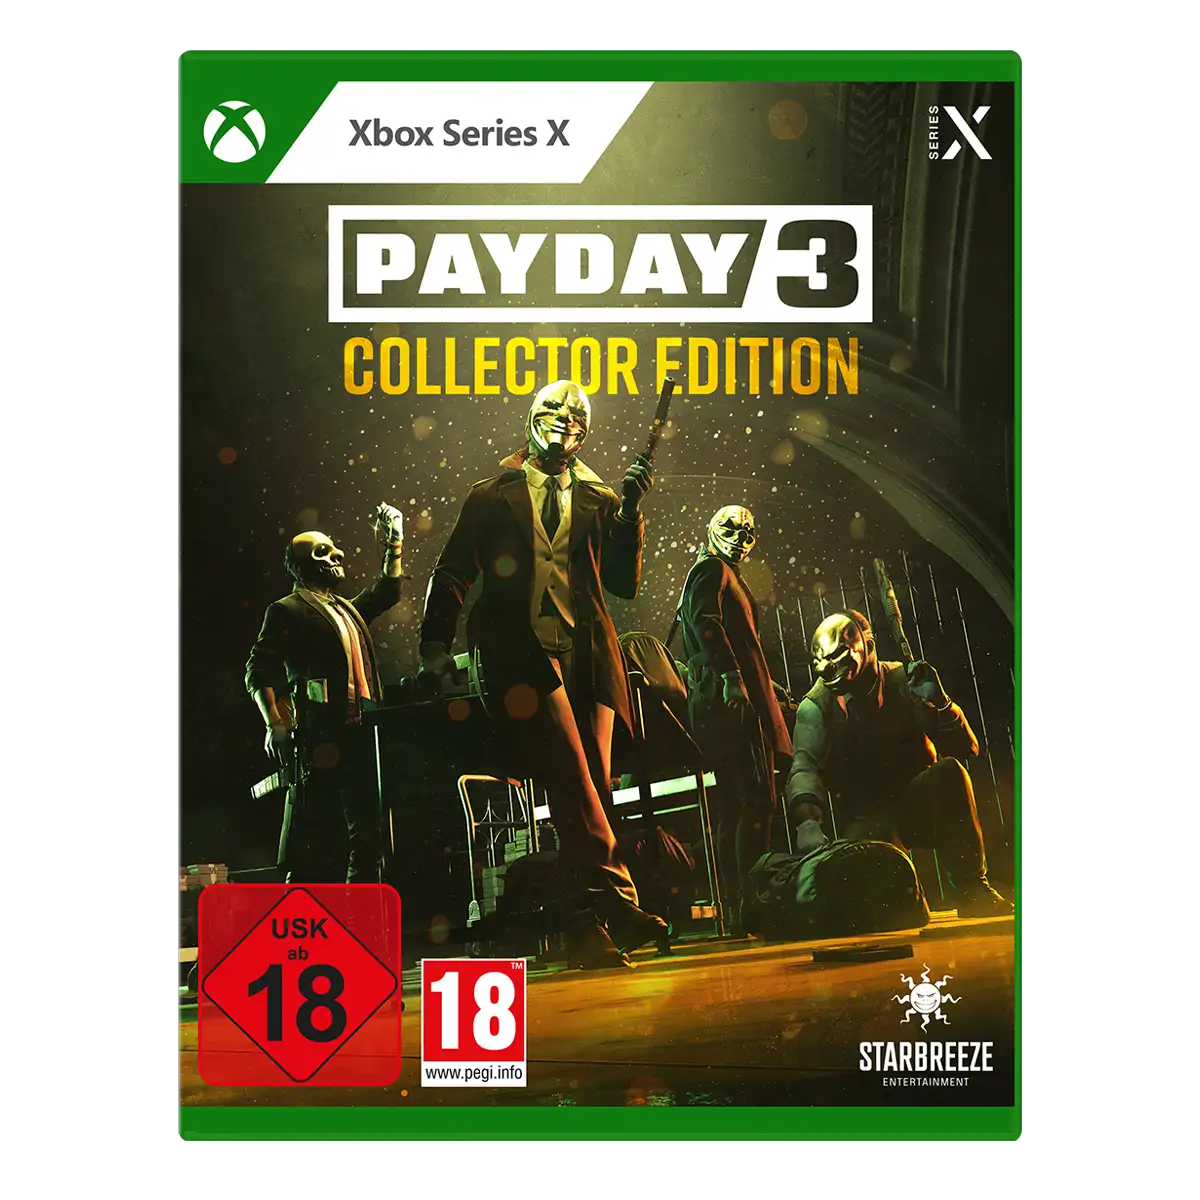 PAYDAY 3 Collector's Edition (Xbox Series X)